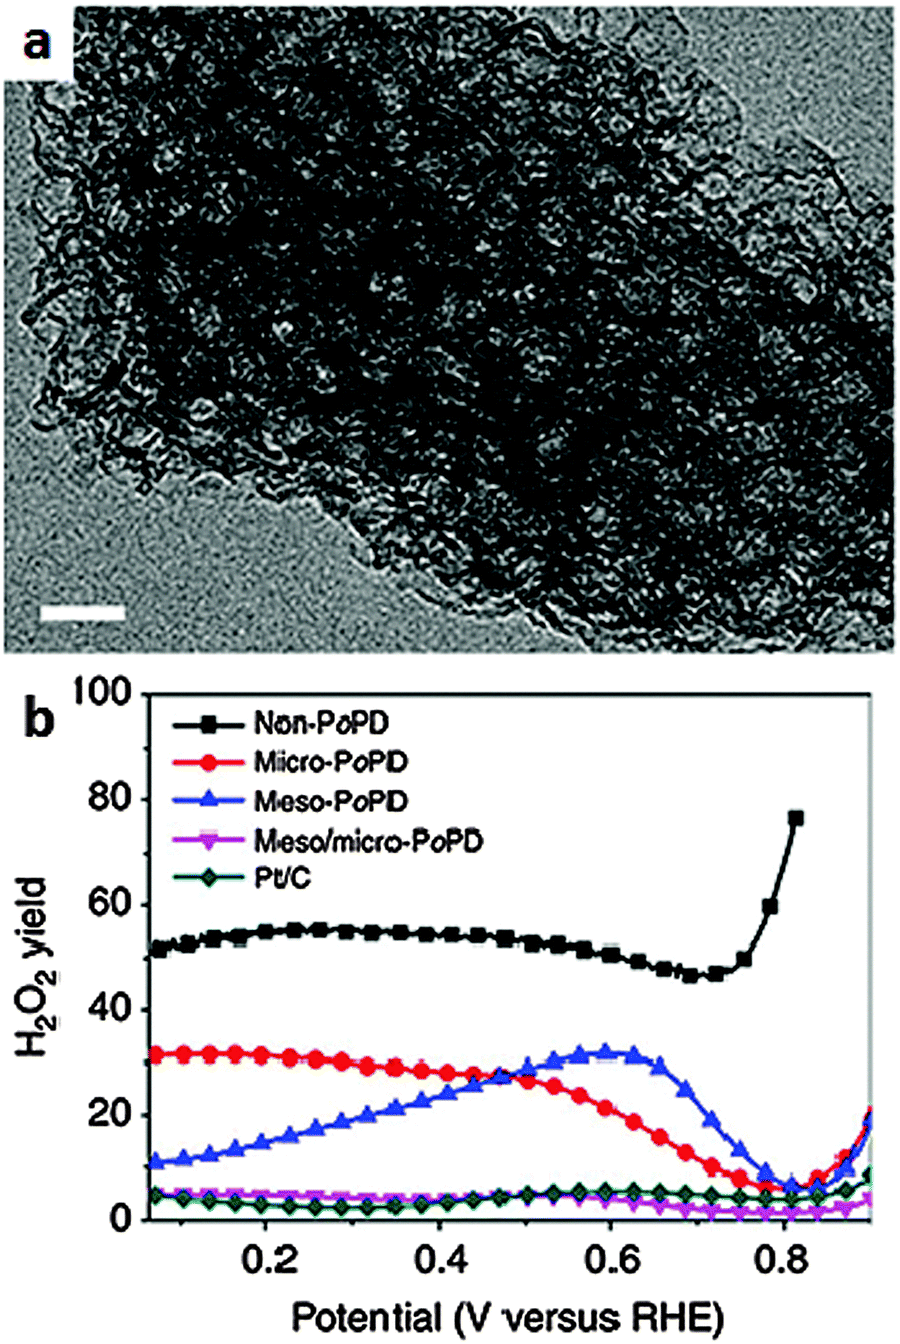 Applications of hierarchically structured porous materials from 